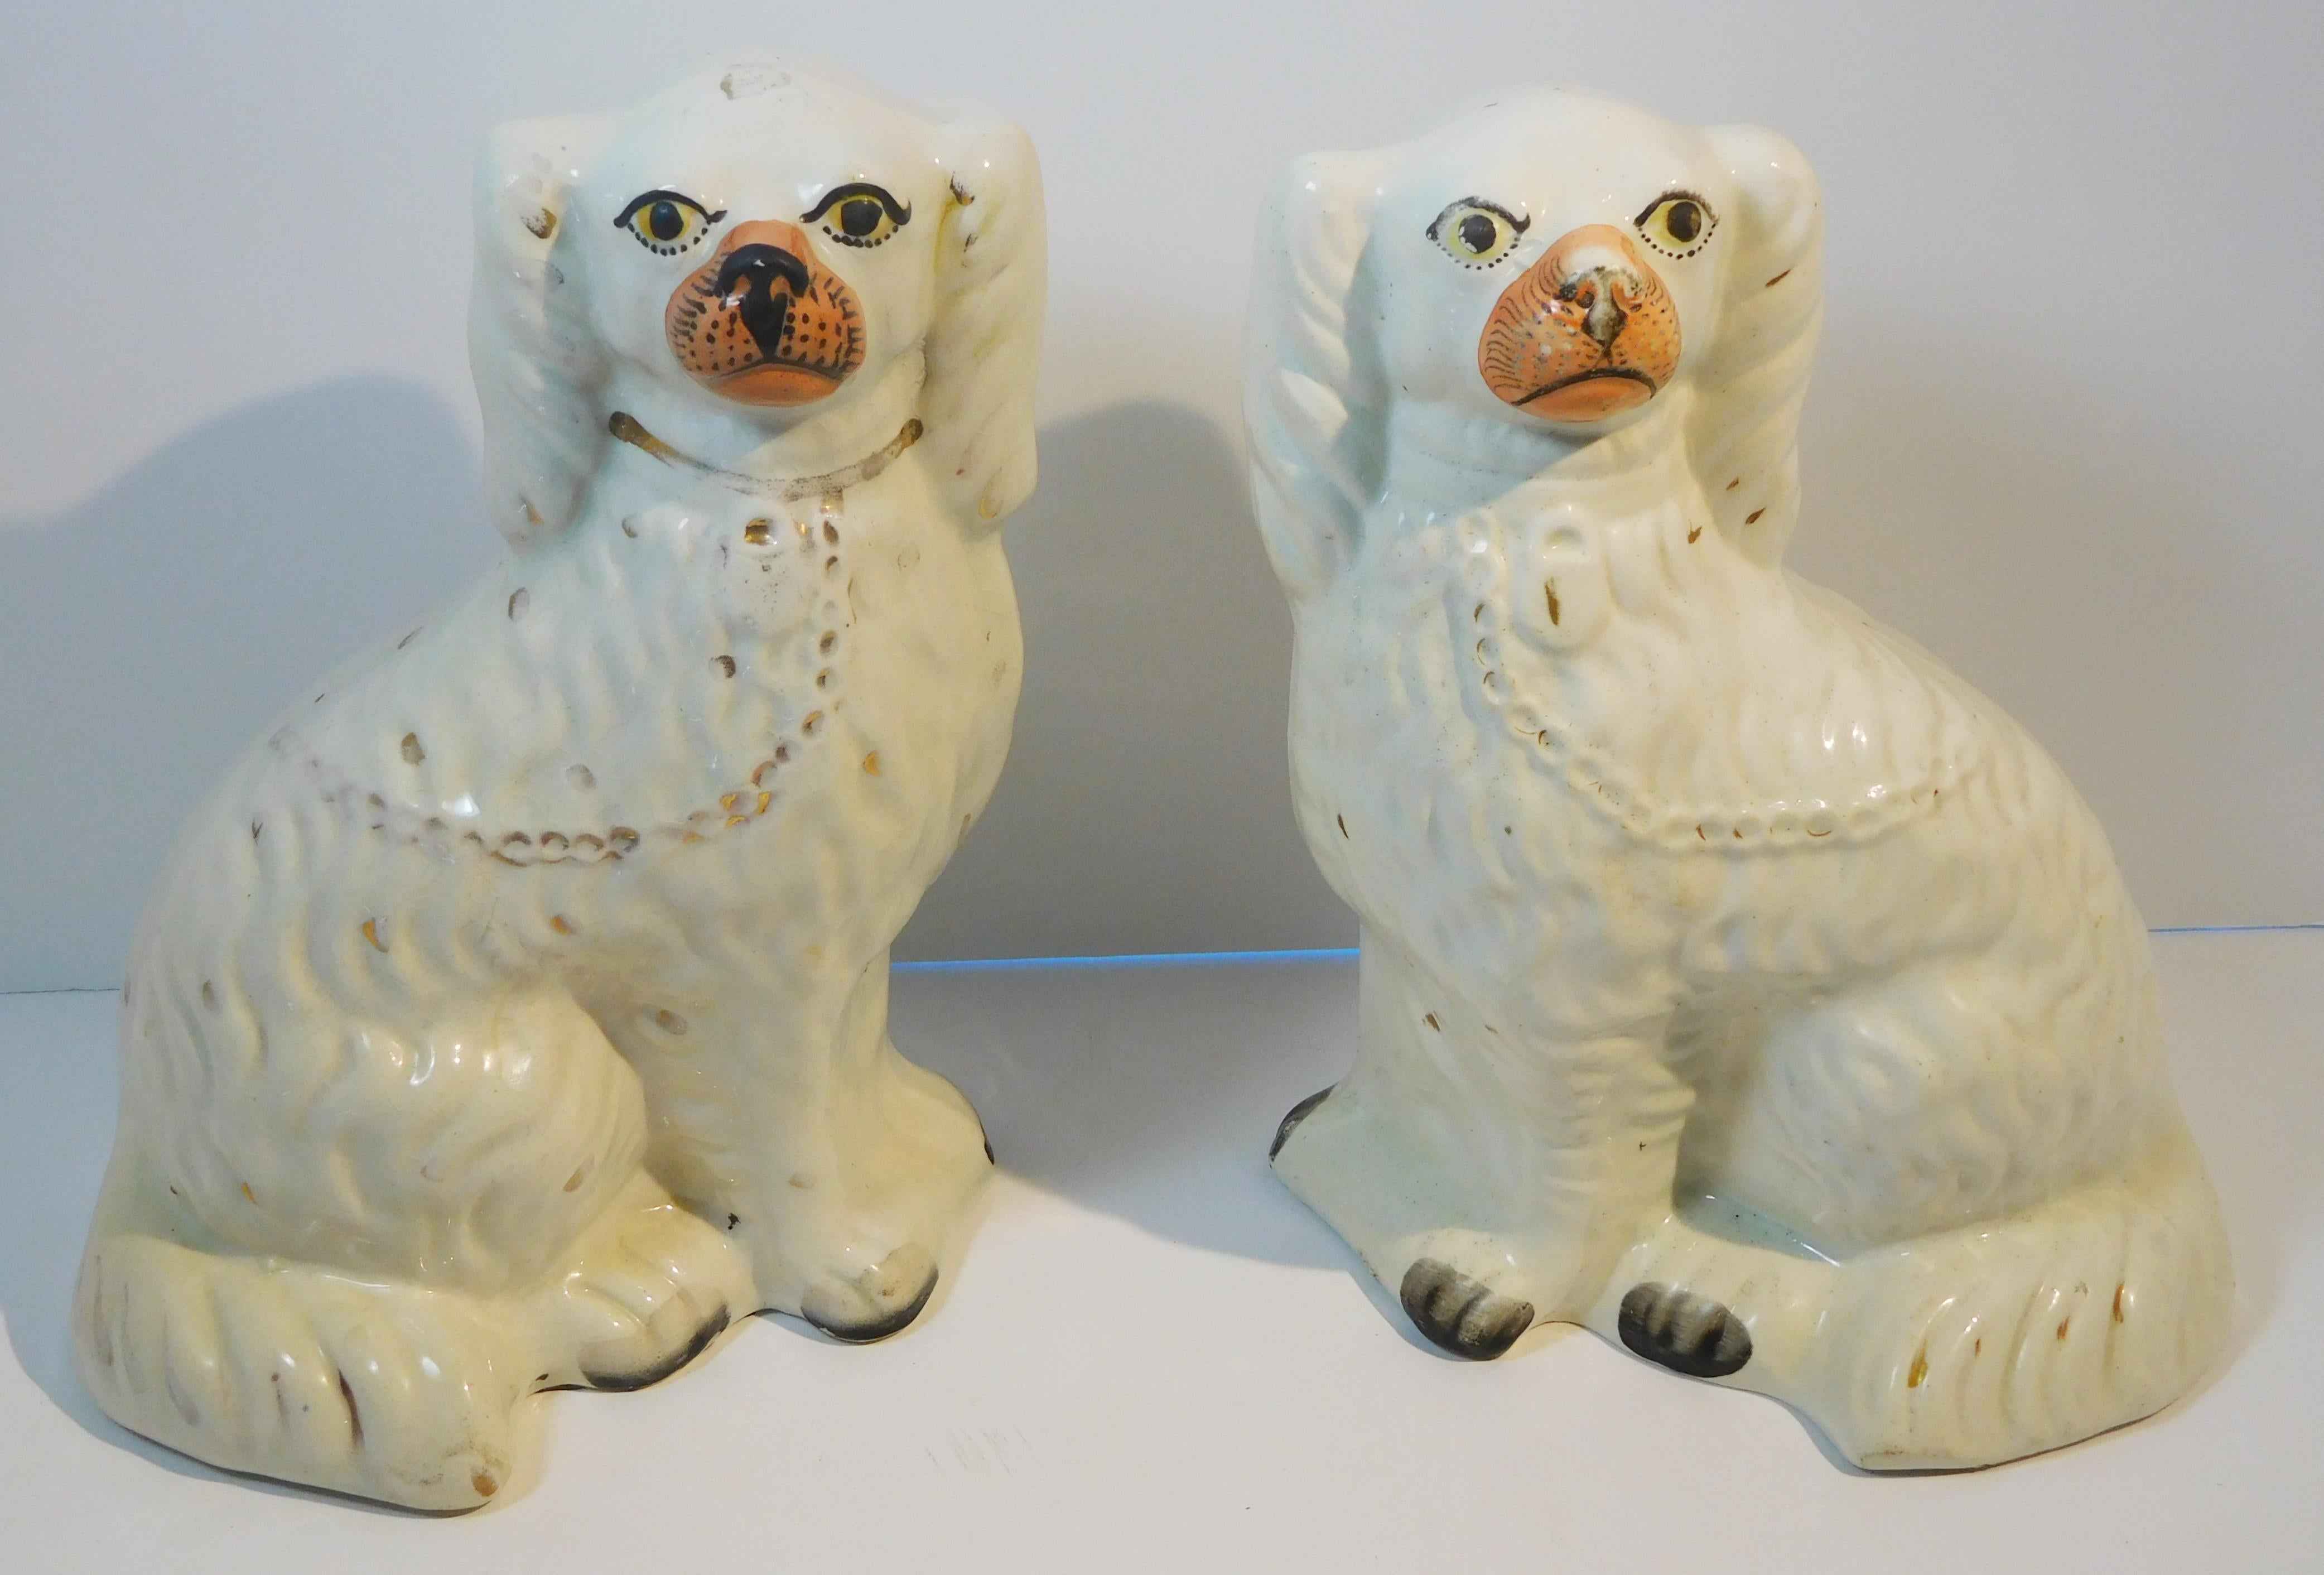 This handsome pair of King Charles Spaniel figures features white bodies, random golden spots and golden collars with locks and leads, sienna-colored snouts and eyeballs and black paws, eyelashes and pupils. The figures are fully rounded and are